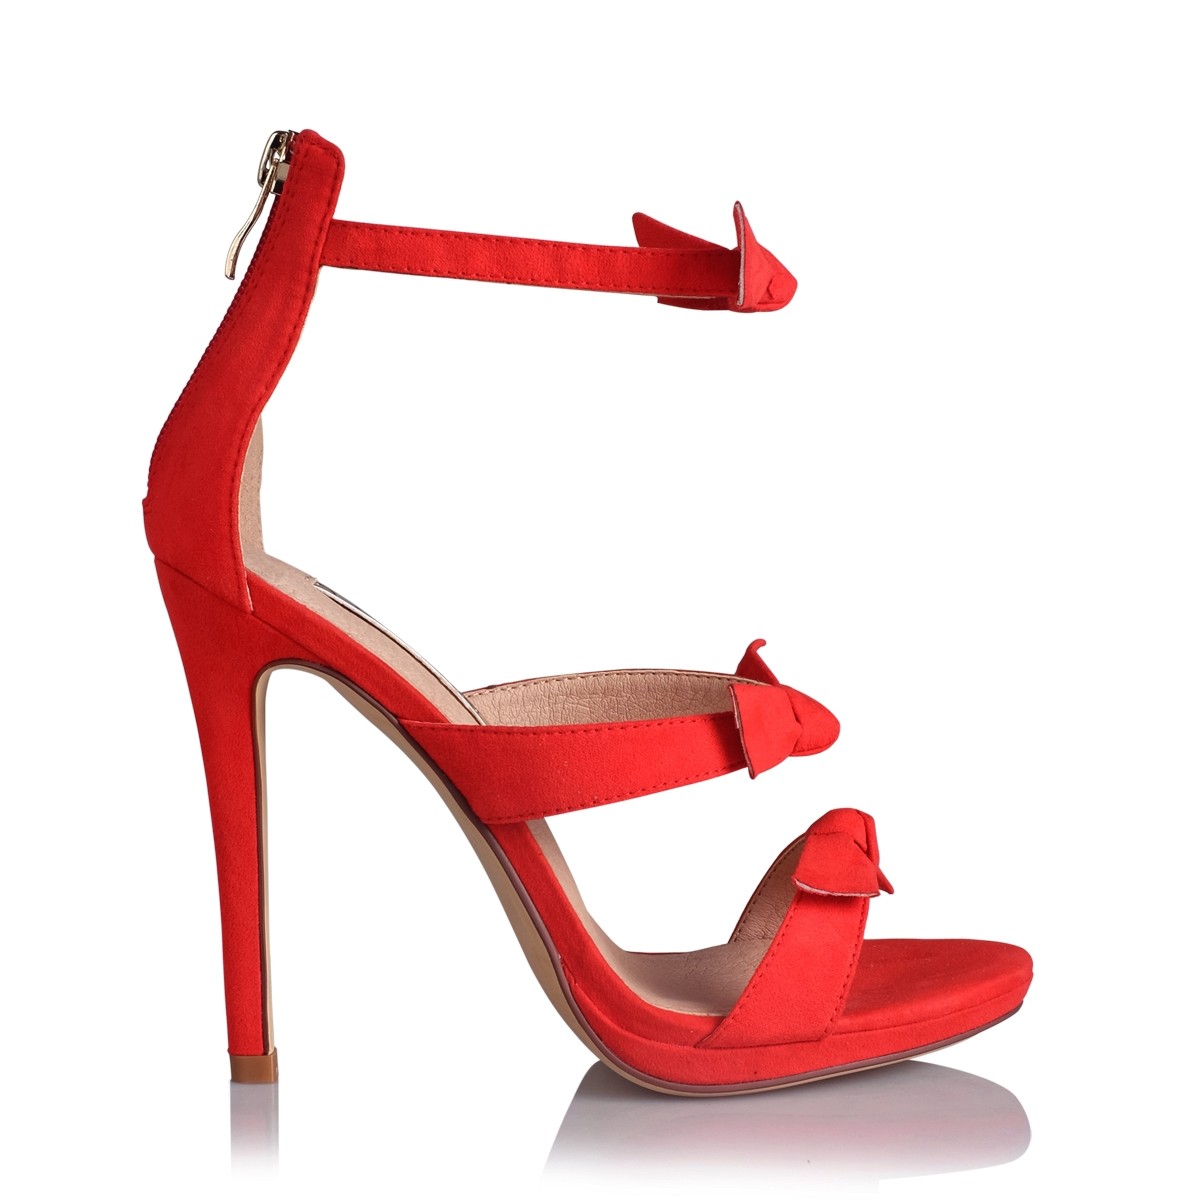 Diani Red Suede by Billini Shoes on Sale | ShoeSales